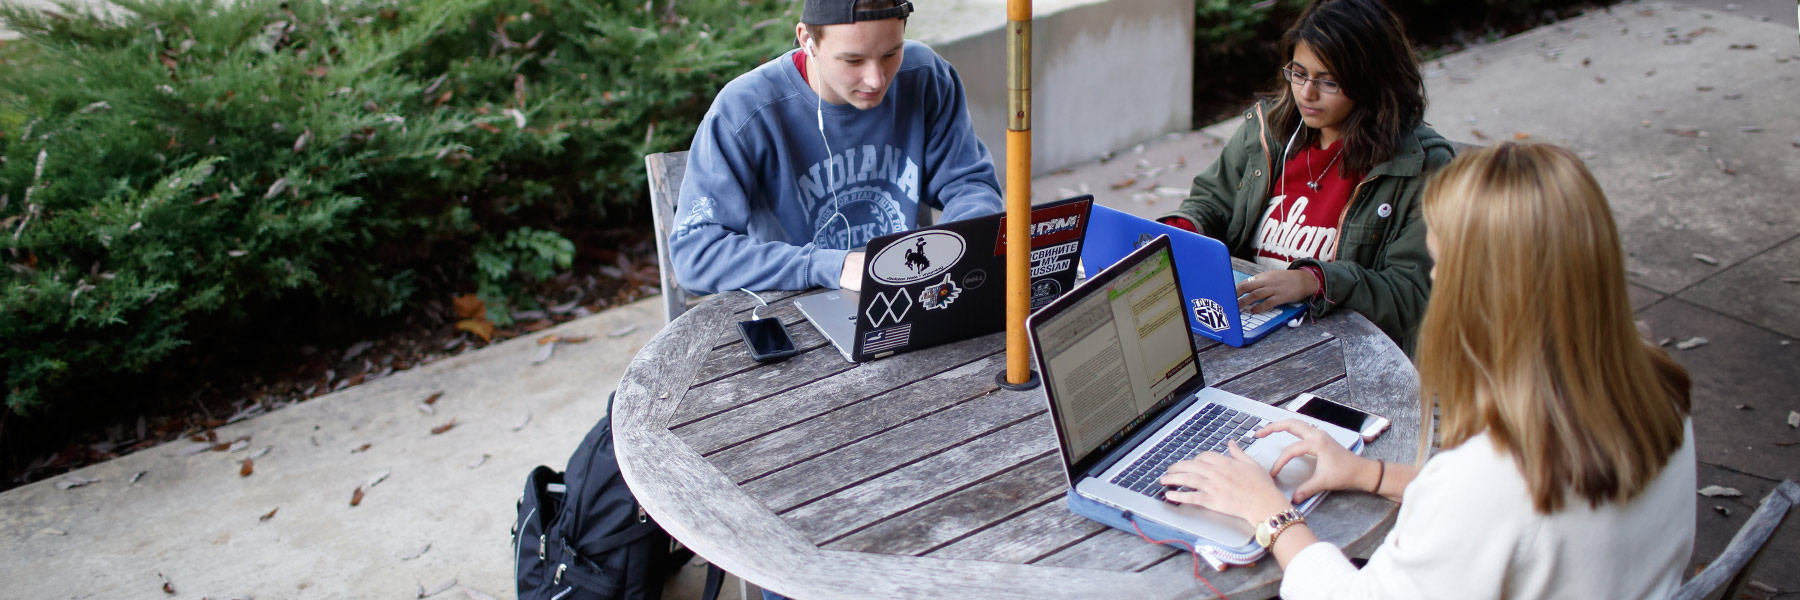 Three students listen to music and work on their laptops at an outdoor table on campus.